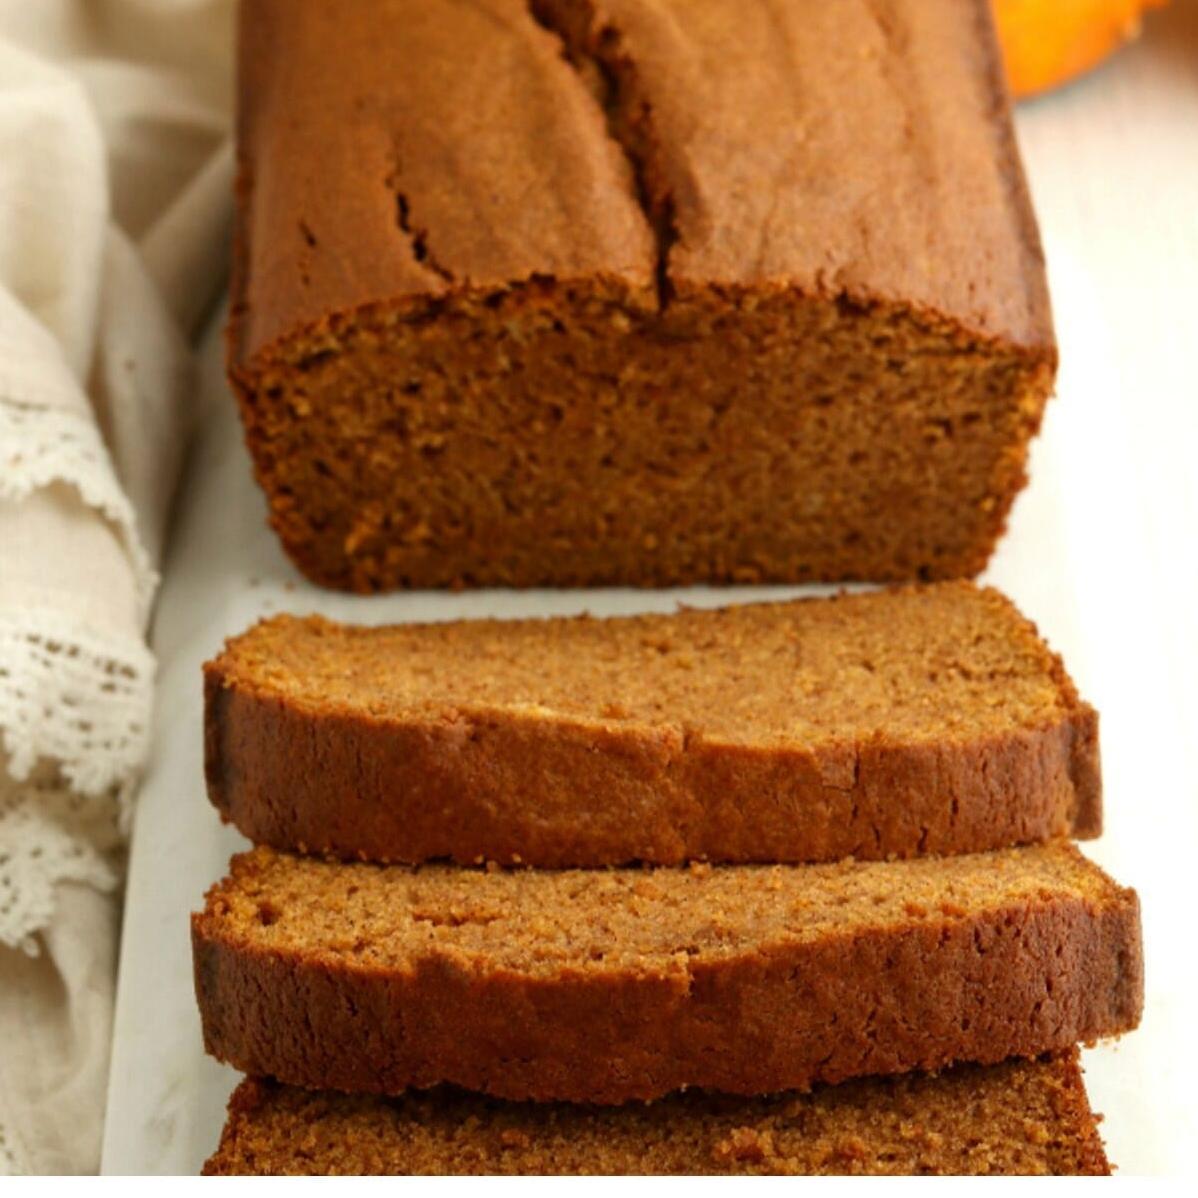  Perfectly spiced and oh so moist, this pumpkin bread will become your new go-to recipe. 🙌🏽